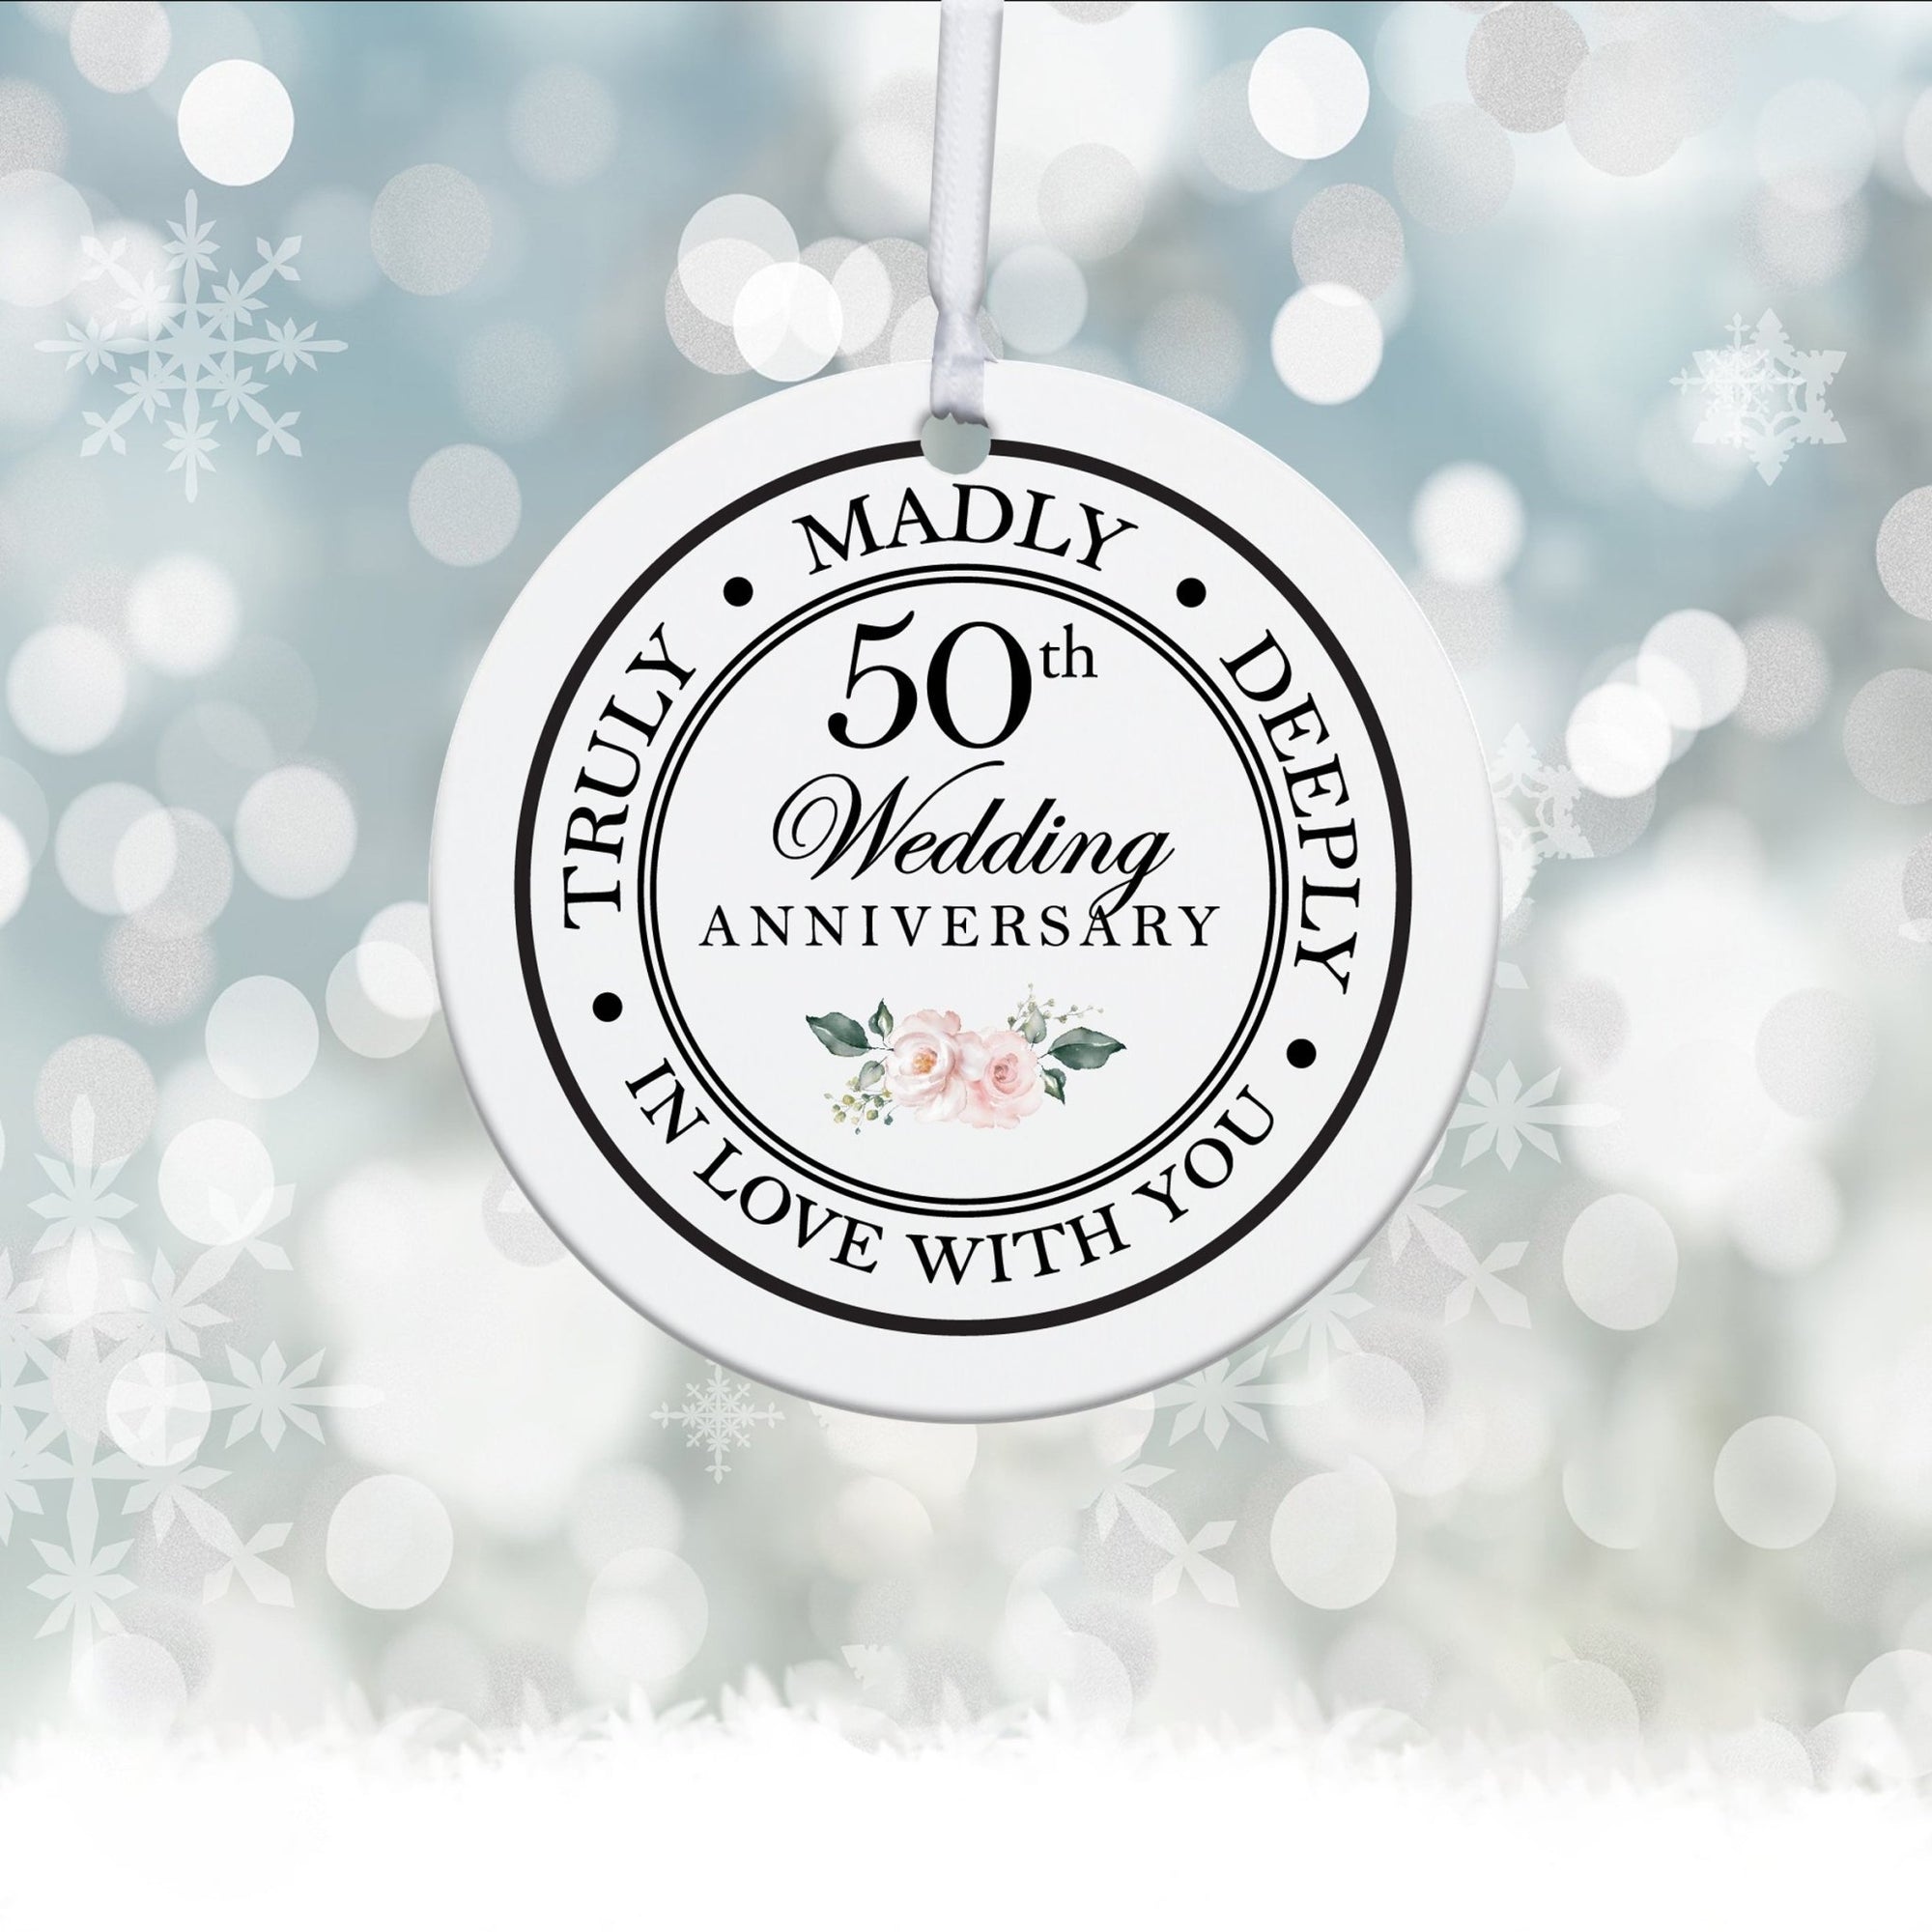 50th Wedding Anniversary White Ornament With Inspirational Message Gift Ideas - Truly, Madly, Deeply In Love With You - LifeSong Milestones